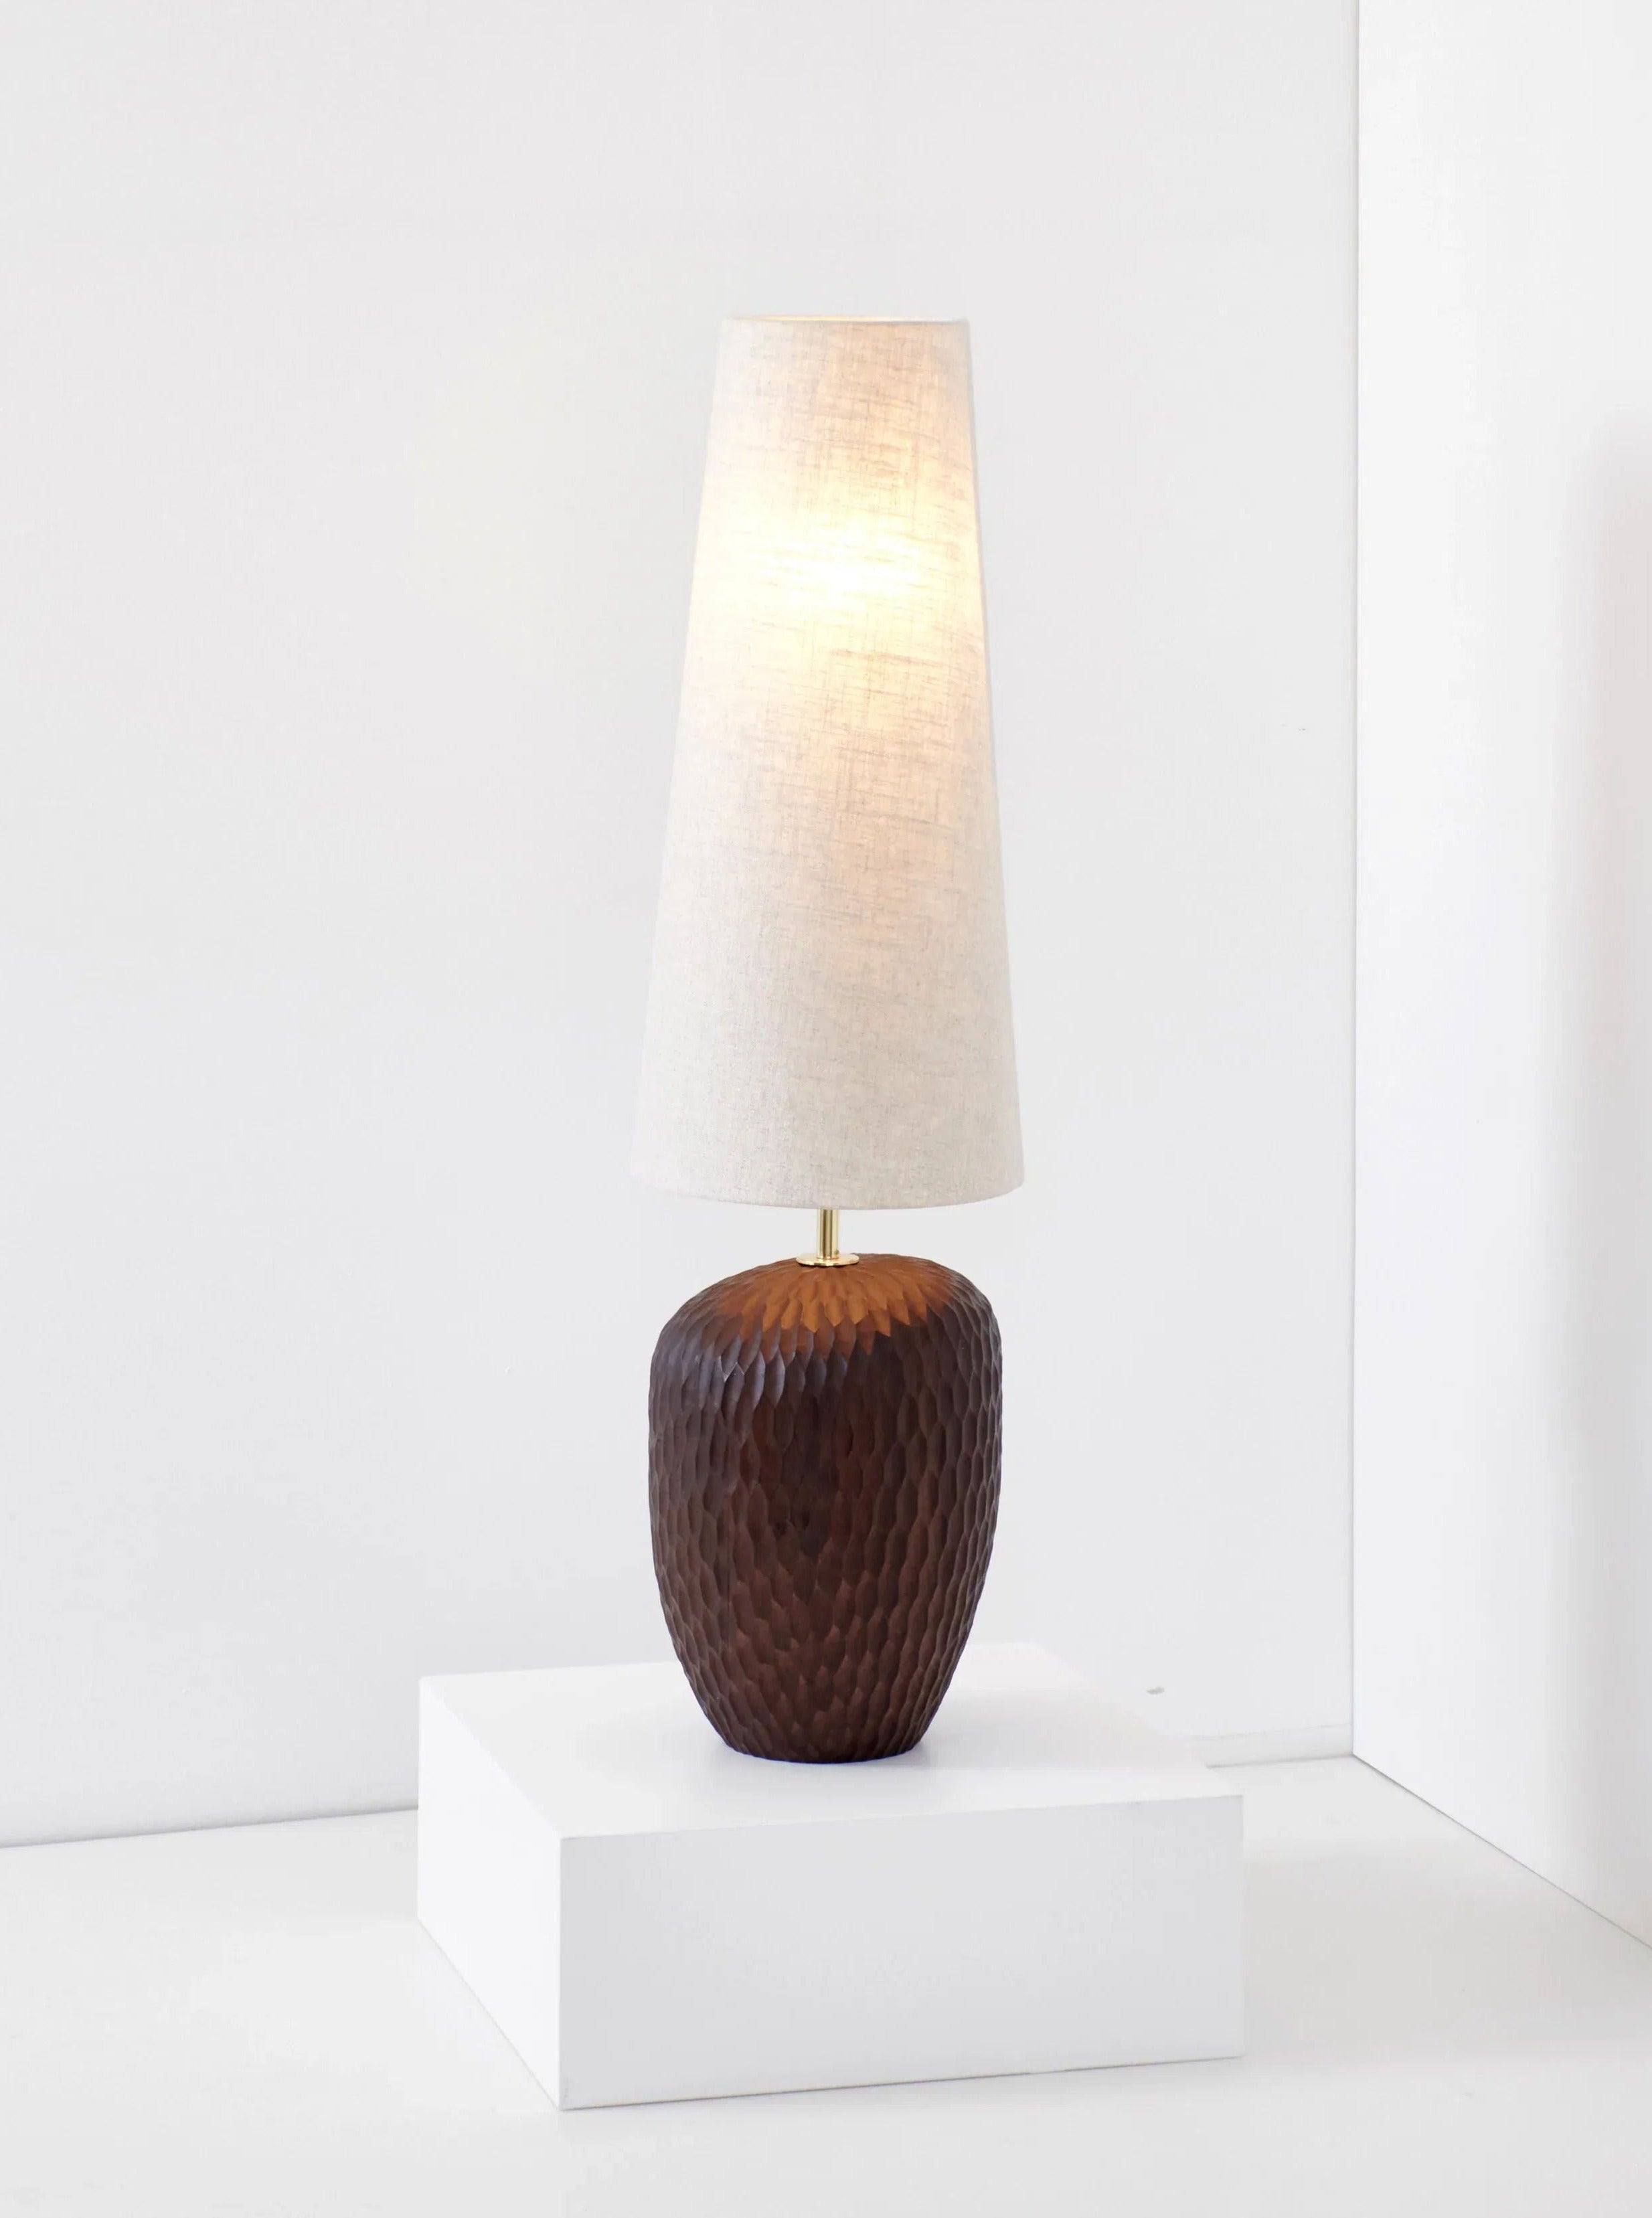 A Large Foz Lamp by Project 213A with a textured, solid wood base and a tall, tapered white lampshade is displayed on a white pedestal. The lamp is set against a minimalist white background.